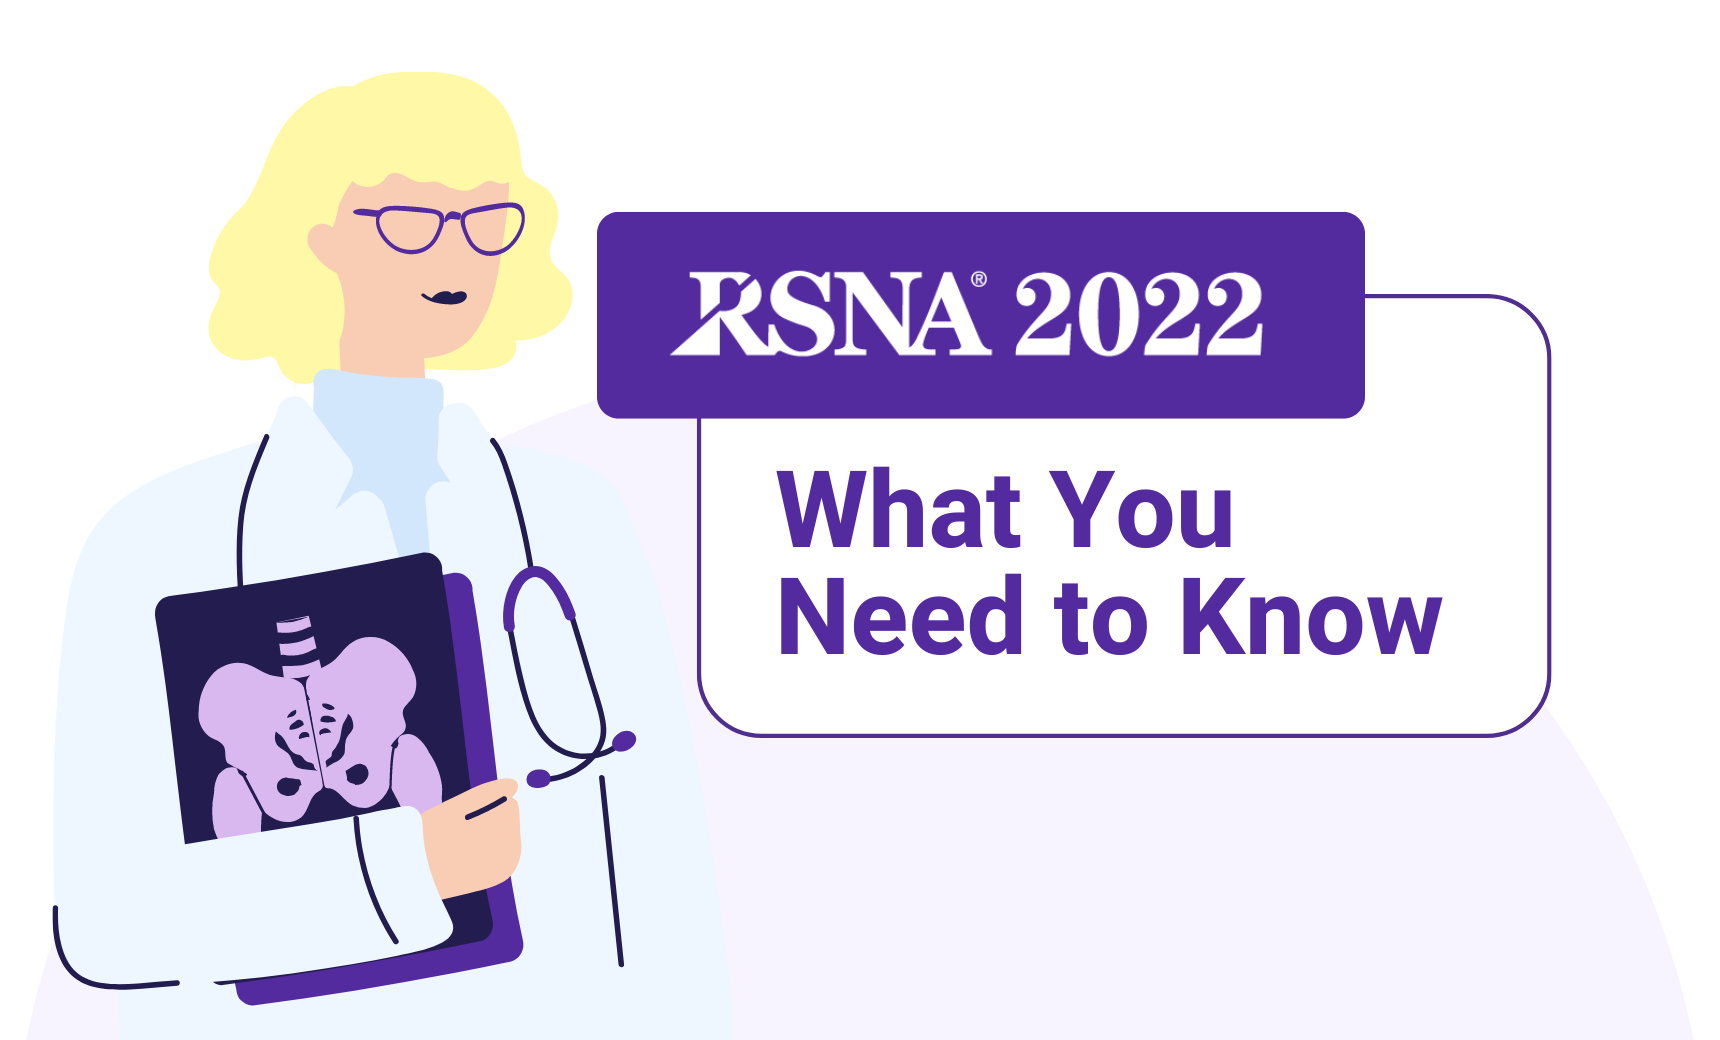 What You Need to Know from RSNA for 2023